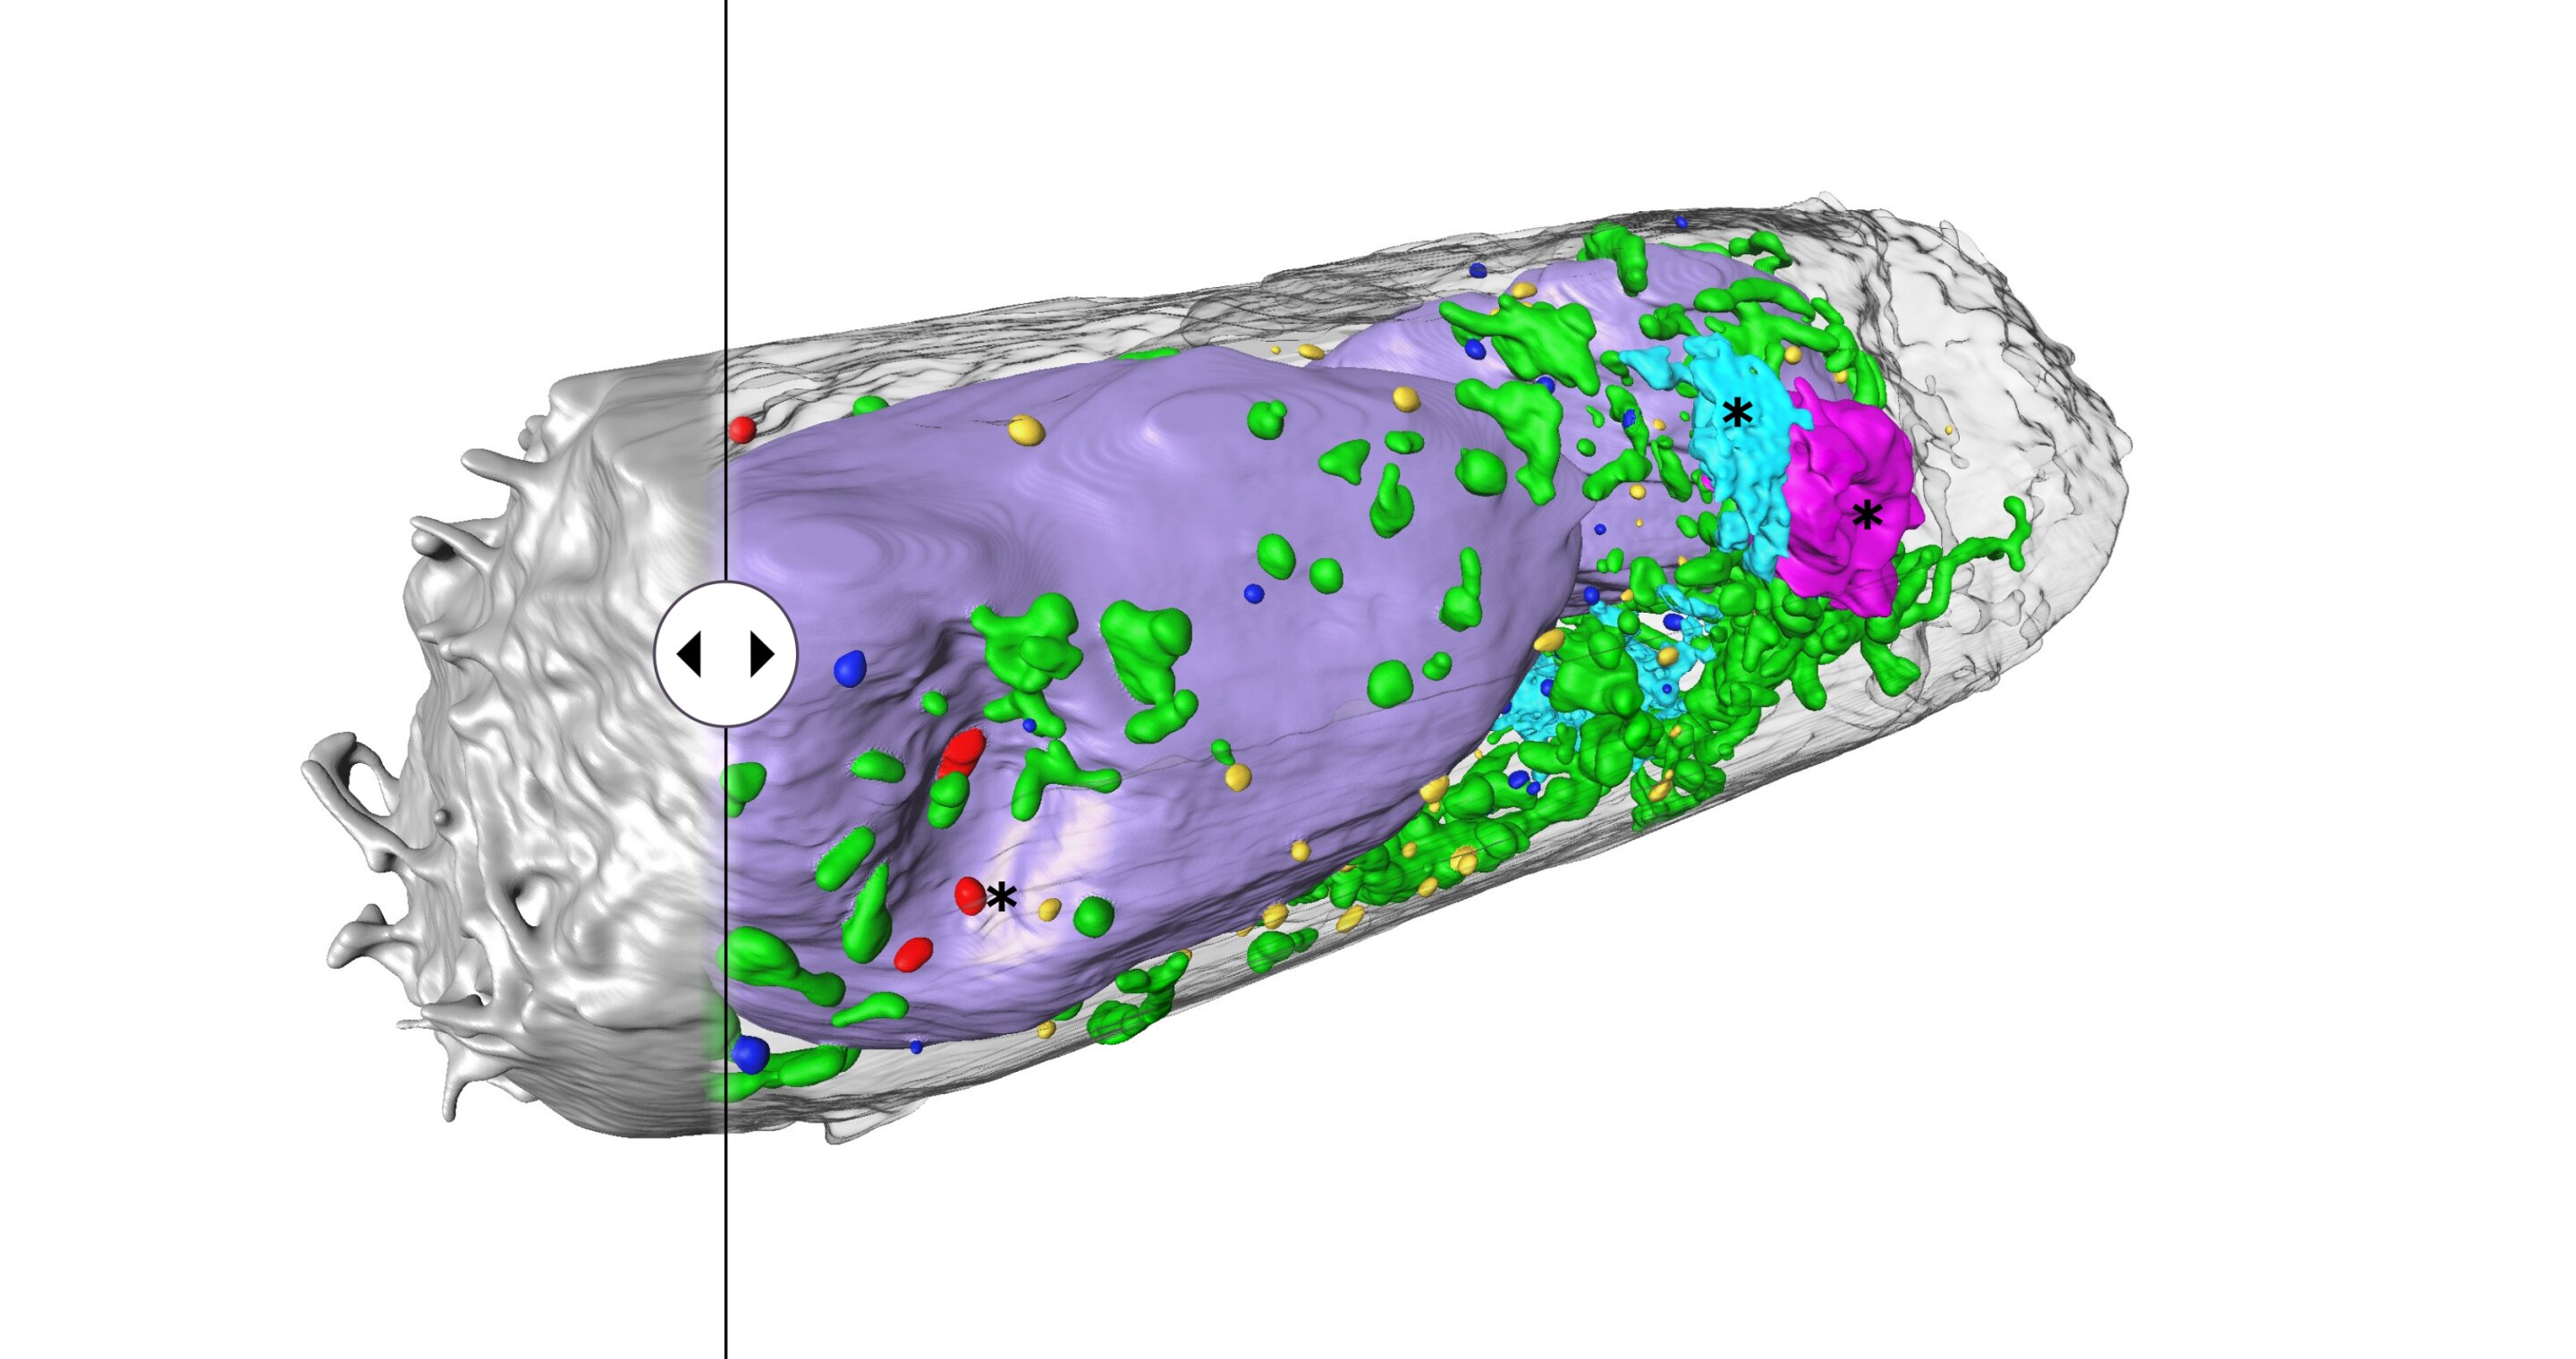 Visualising cell structures in three dimensions in mere minutes